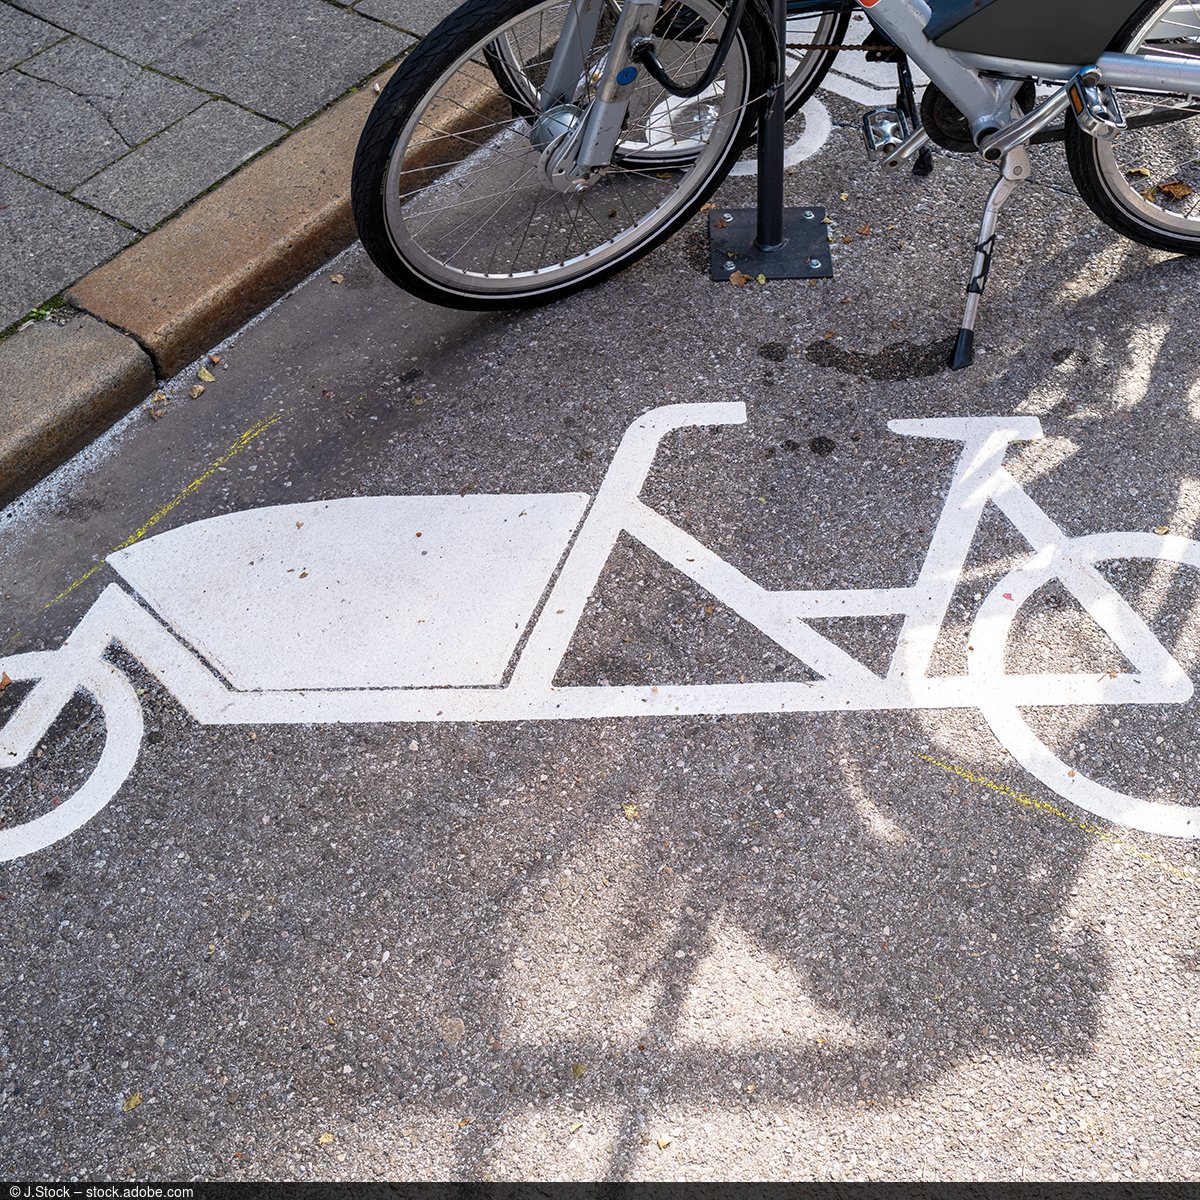 Picture of a cargo bike car park with appropriate markings on the ground